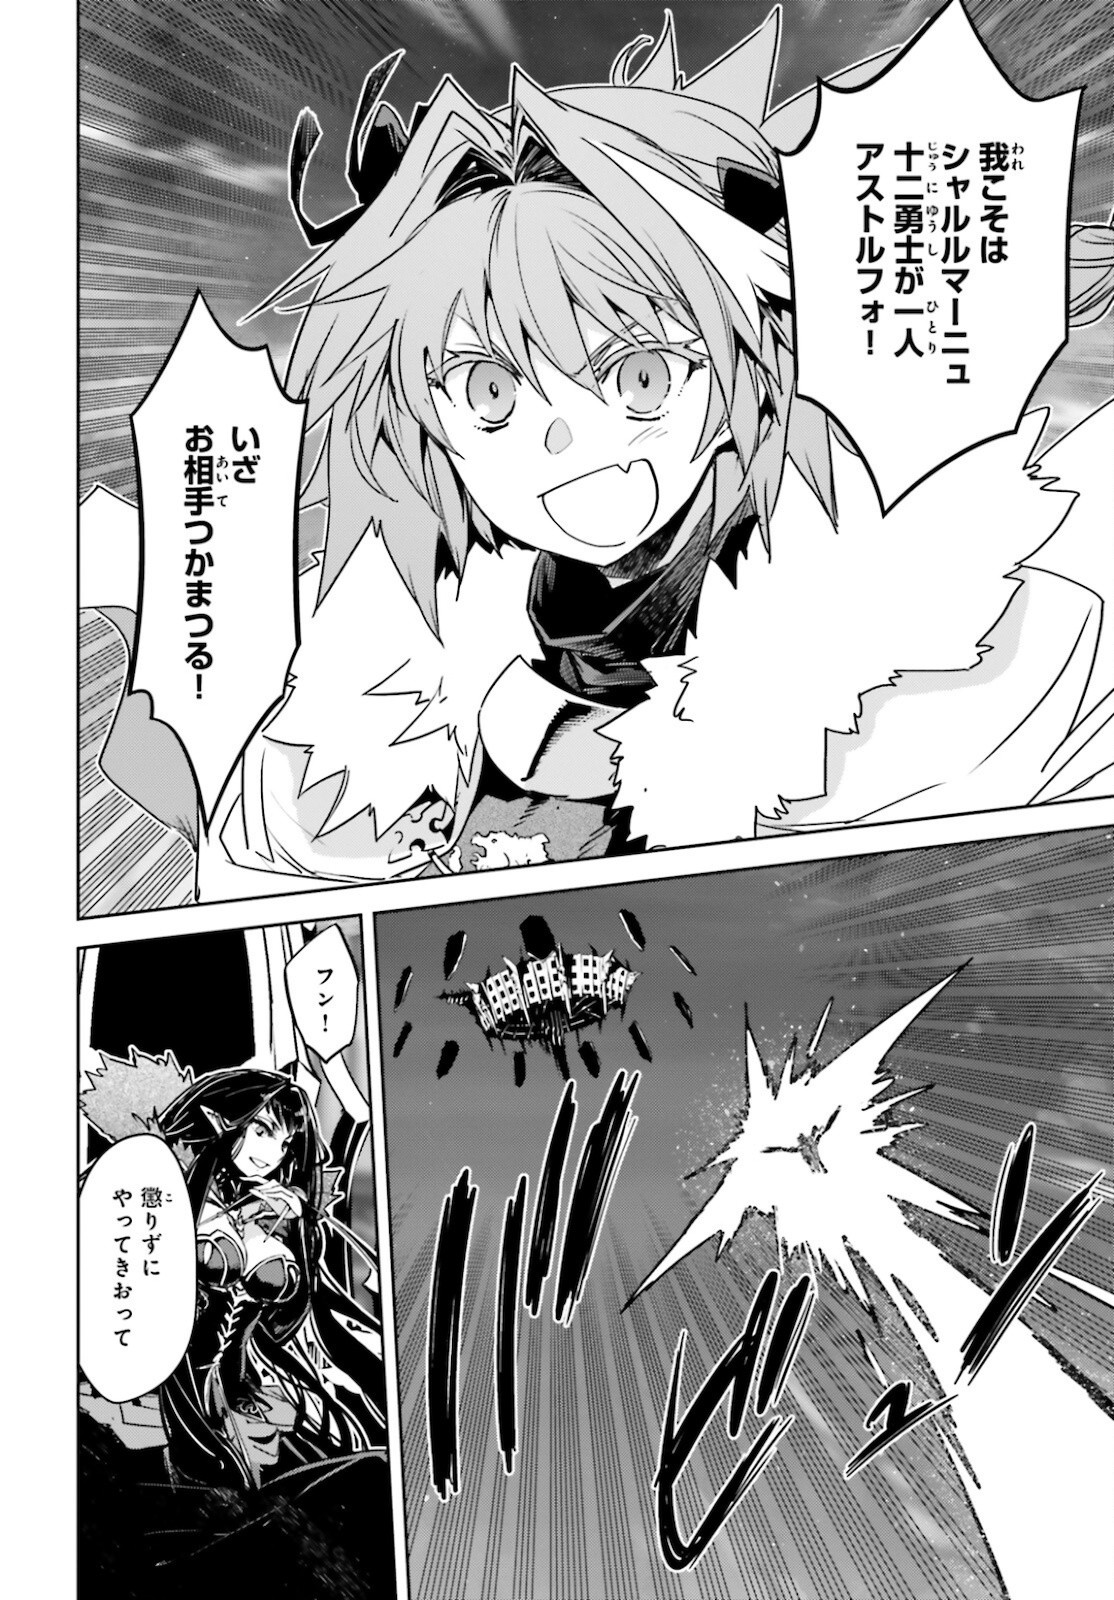 Fate-Apocrypha - Chapter 55-2 - Page 5